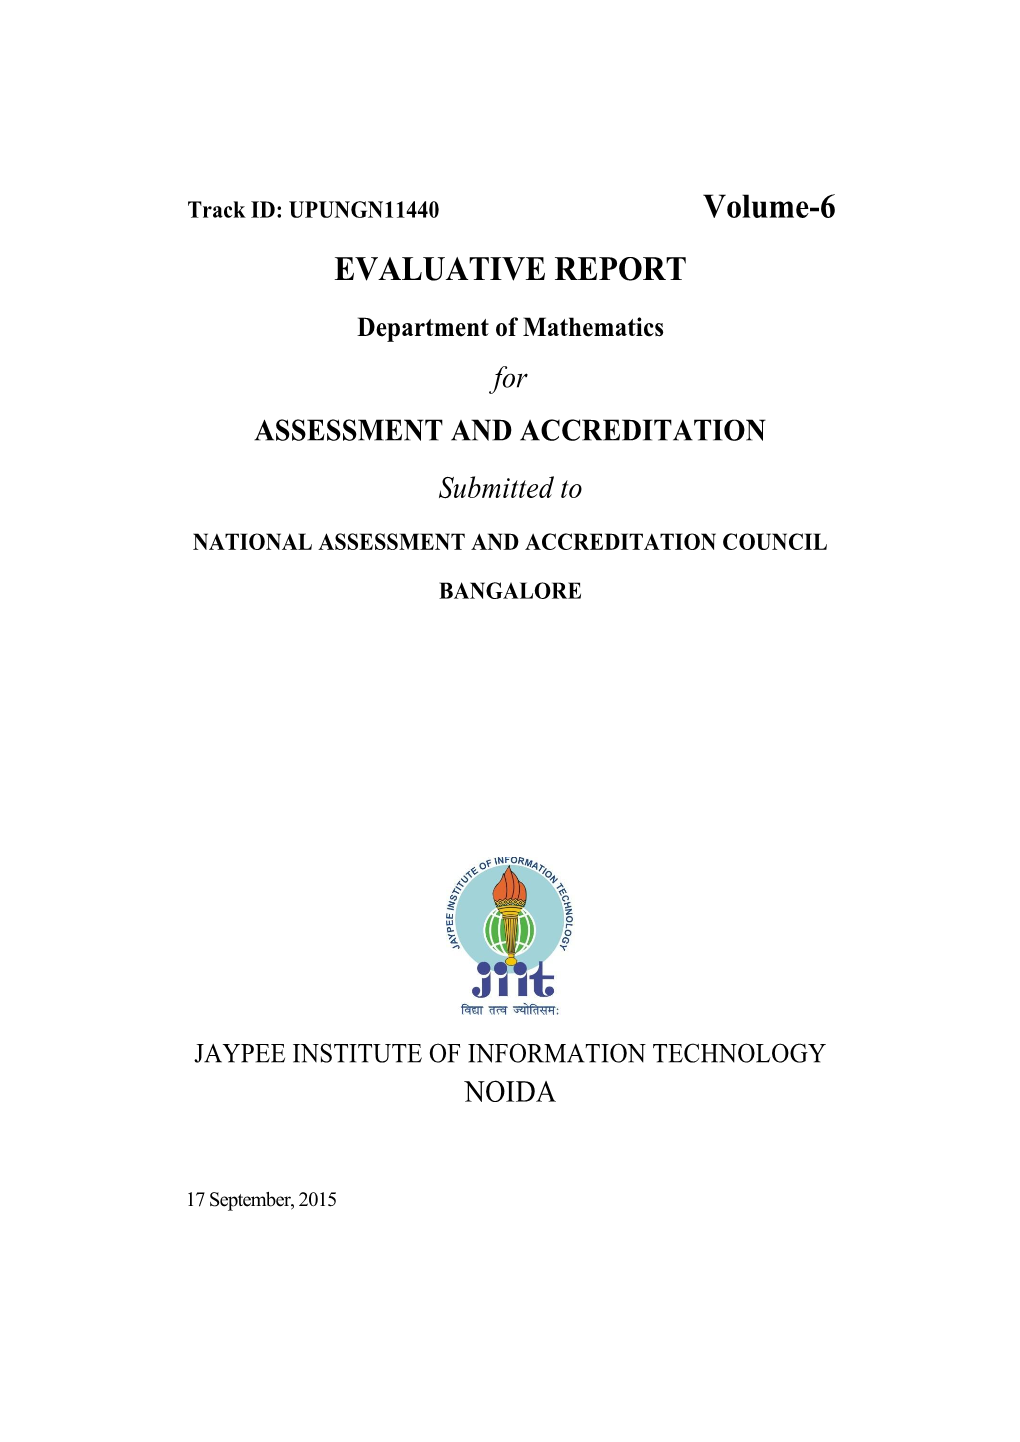 Mathematics for ASSESSMENT and ACCREDITATION Submitted To